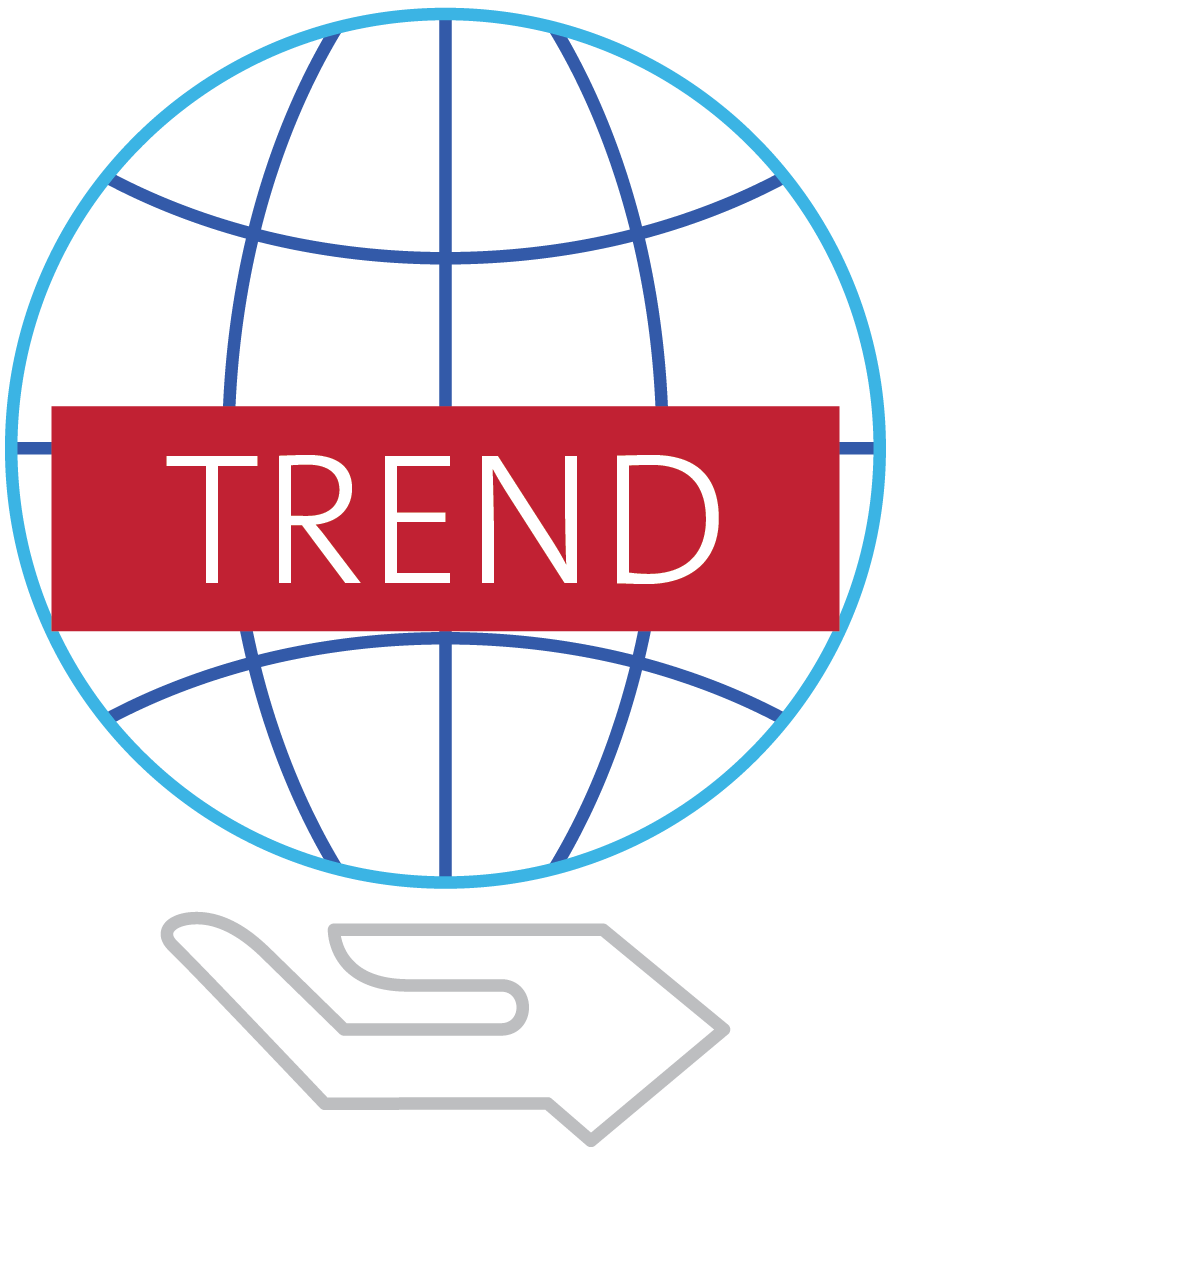 Key trend icon for covid-19 pandemic